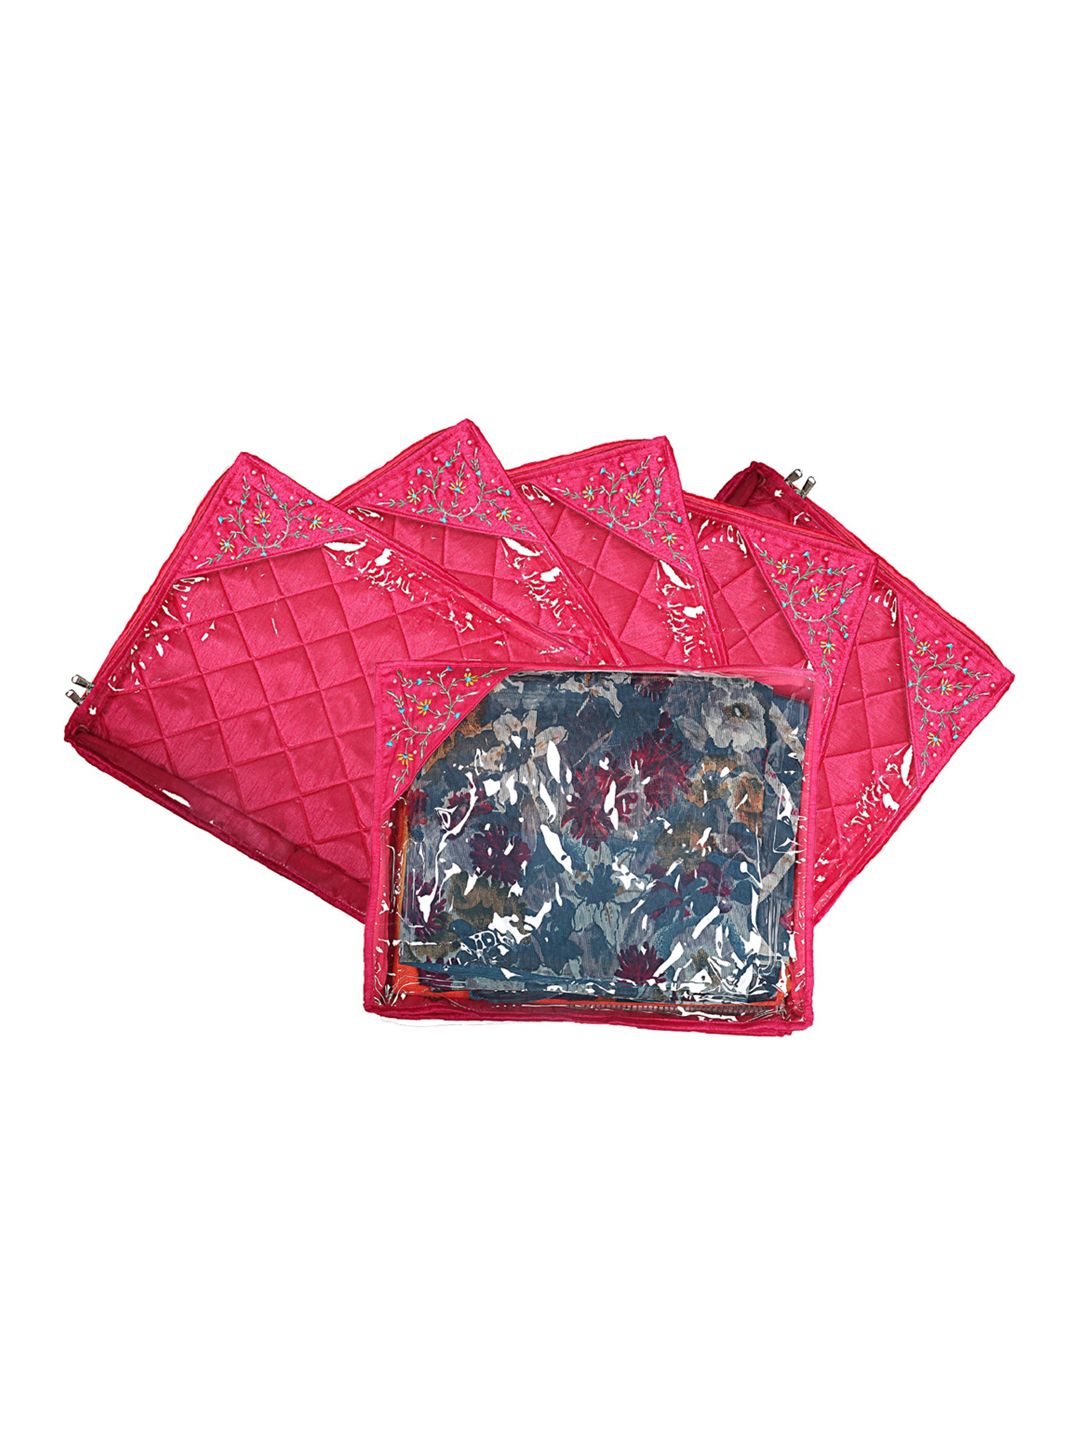 Kuber Industries Set Of 6 Pink Embroidered Saree Organizers Price in India